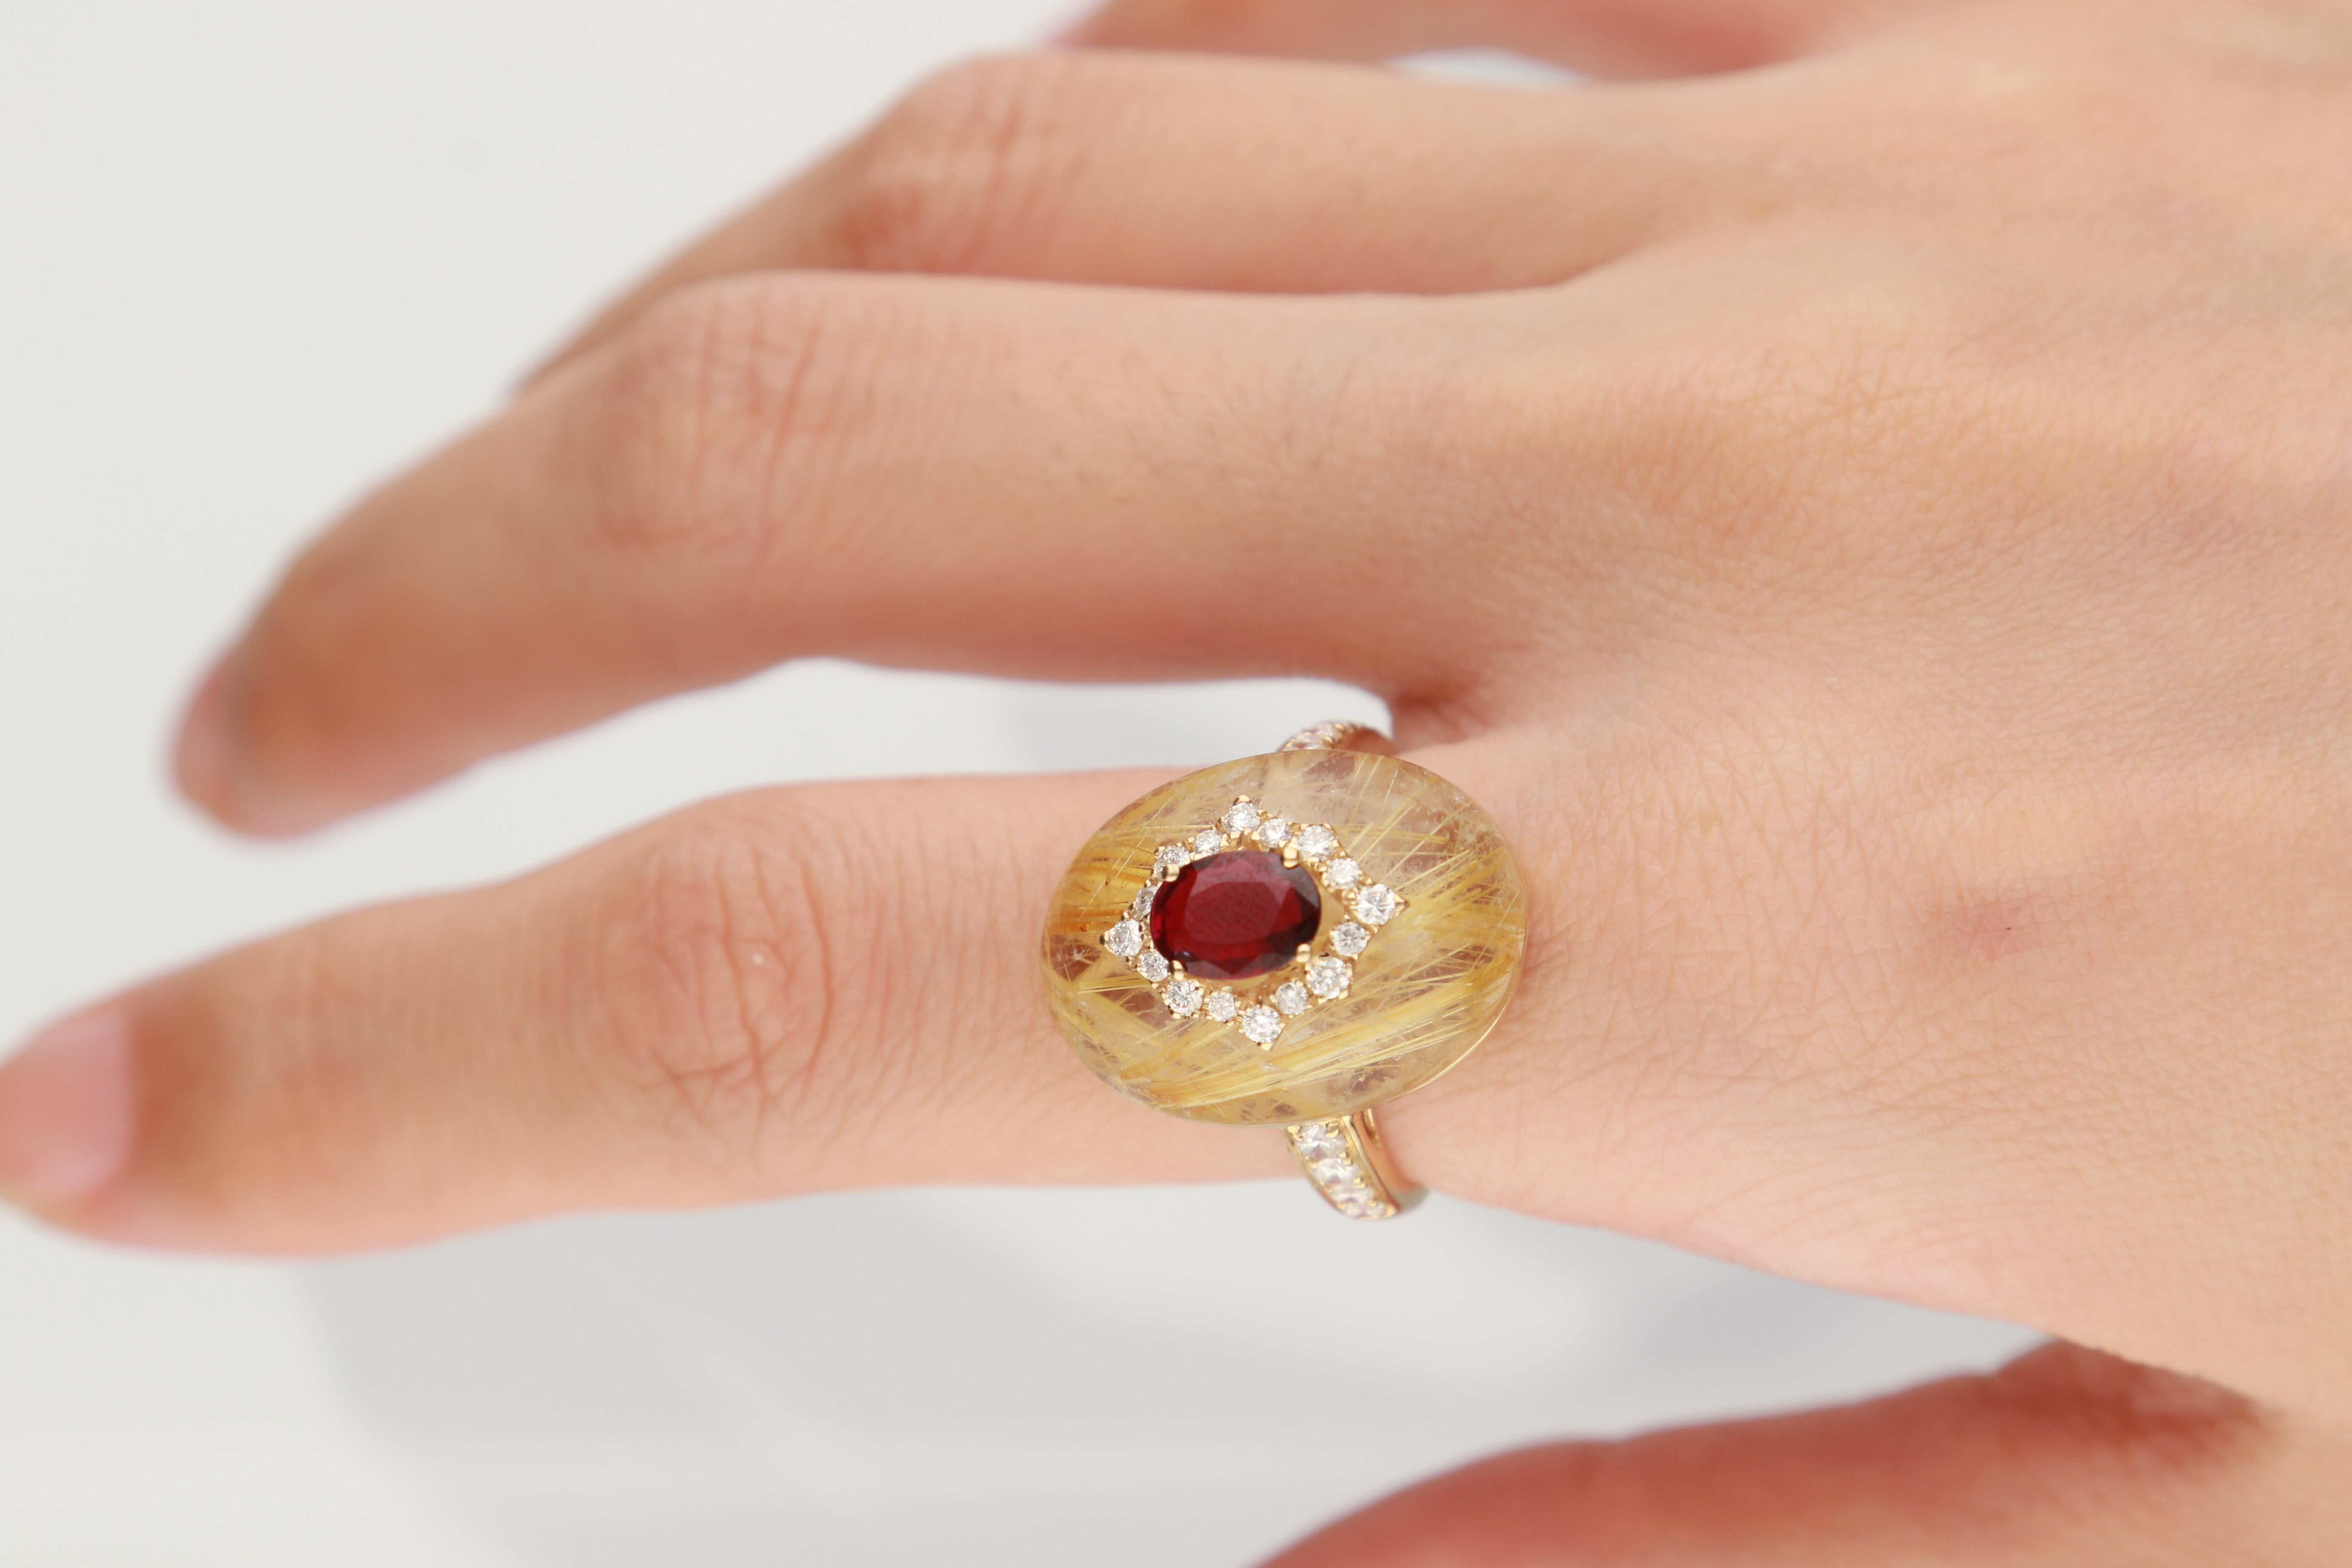 This beautiful Ruby Ring is crafted in 14-karat Yellow gold and features a 3/4 carat 1 Pc Genuine Ruby, 1 Pc Rulite Quartz 16.025 Carats and  24 Pcs Round White Diamonds in GH- I1 quality with 0.47 Ct in a prong-setting. This Ring comes in sizes 6